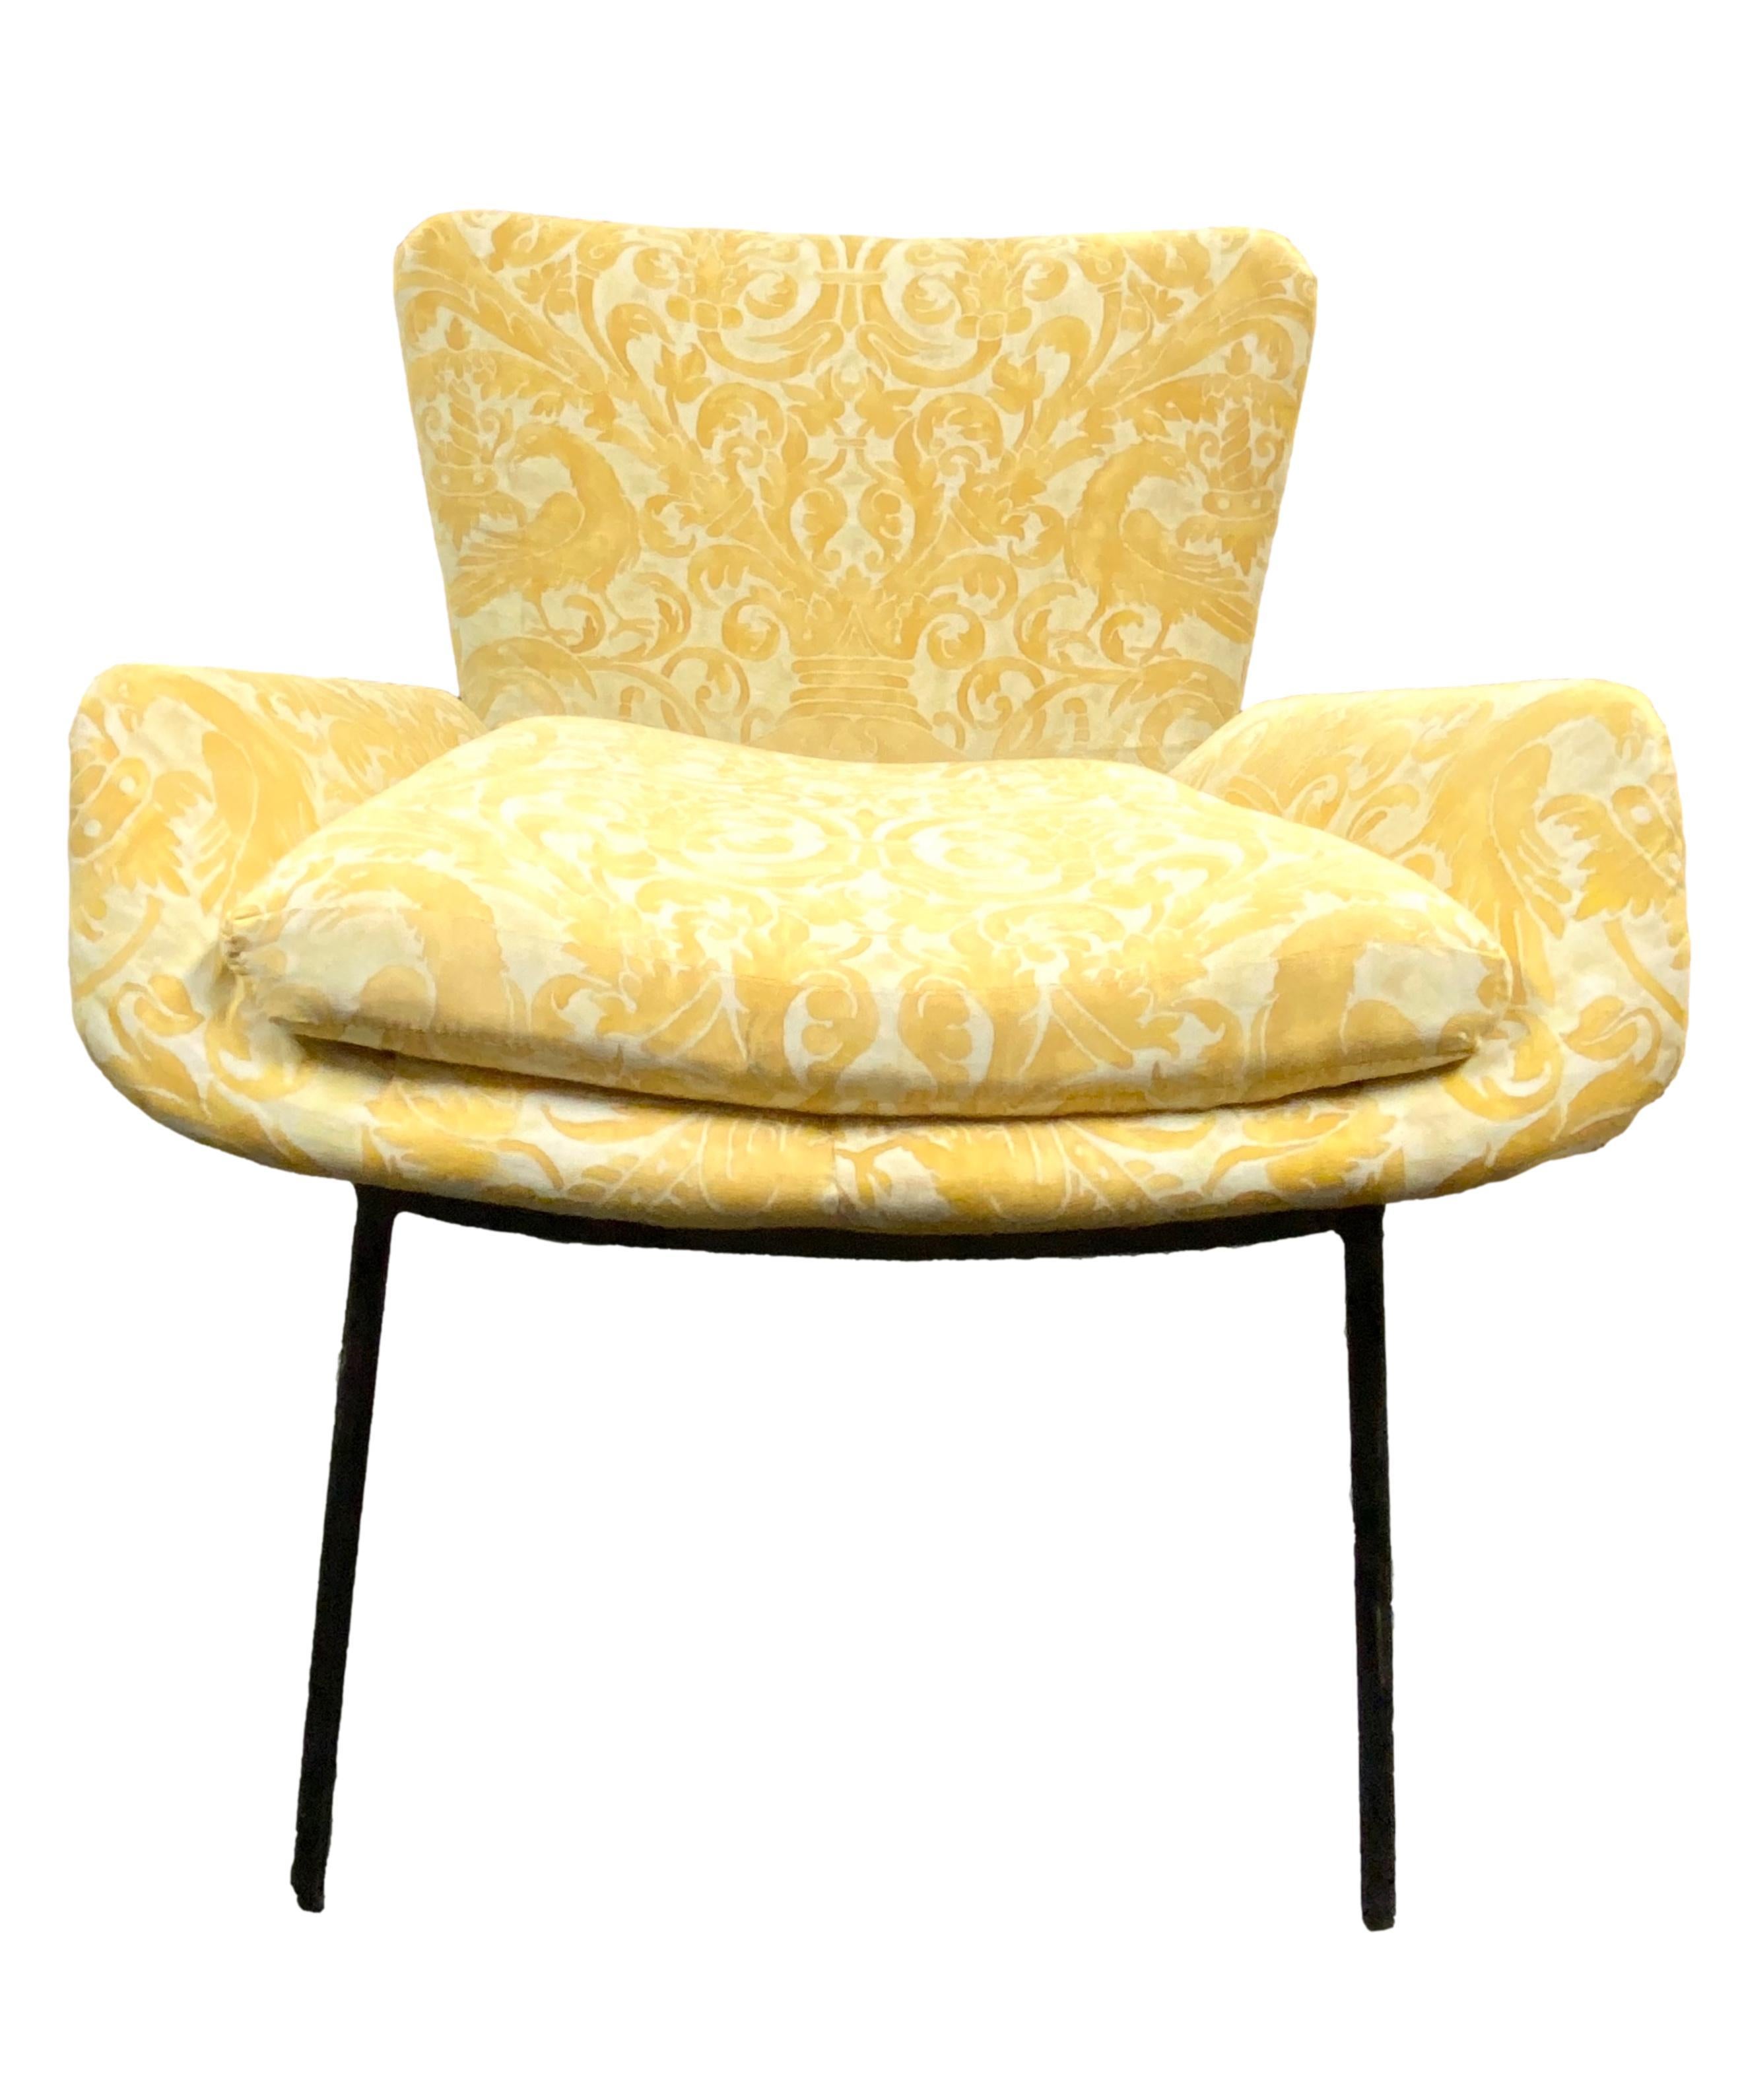 Italian Side Chair with Fortuny Upholstery In Good Condition For Sale In East Hampton, NY